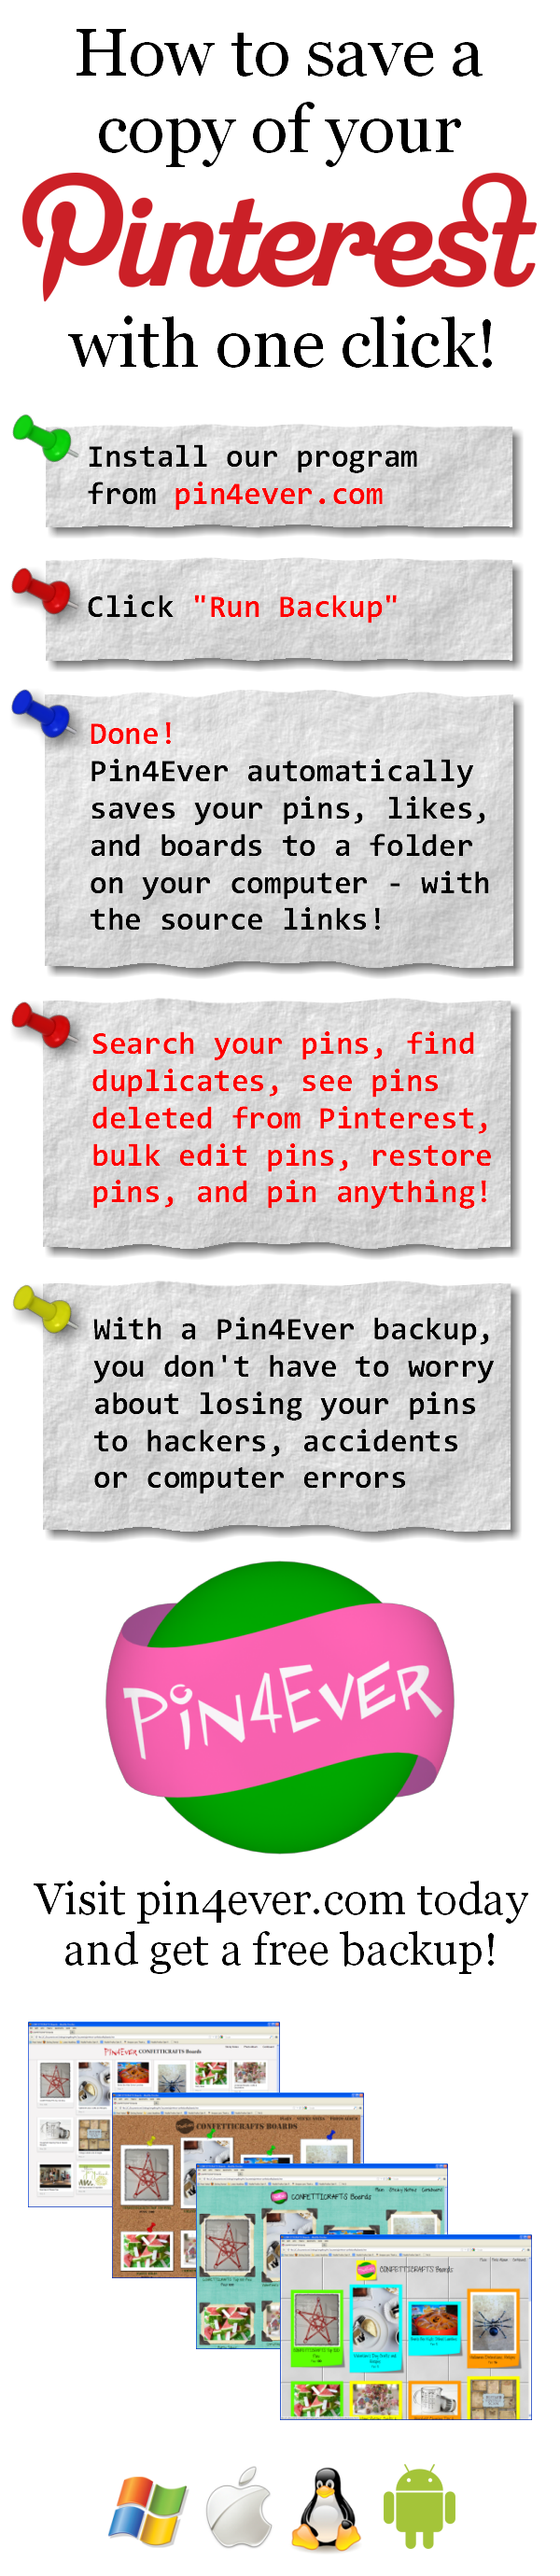 Are your pins protected? Pin4Ever has saved, edited or uploaded 476,364,119 pins since September 2012. Go to pin4ever.com and try it free!